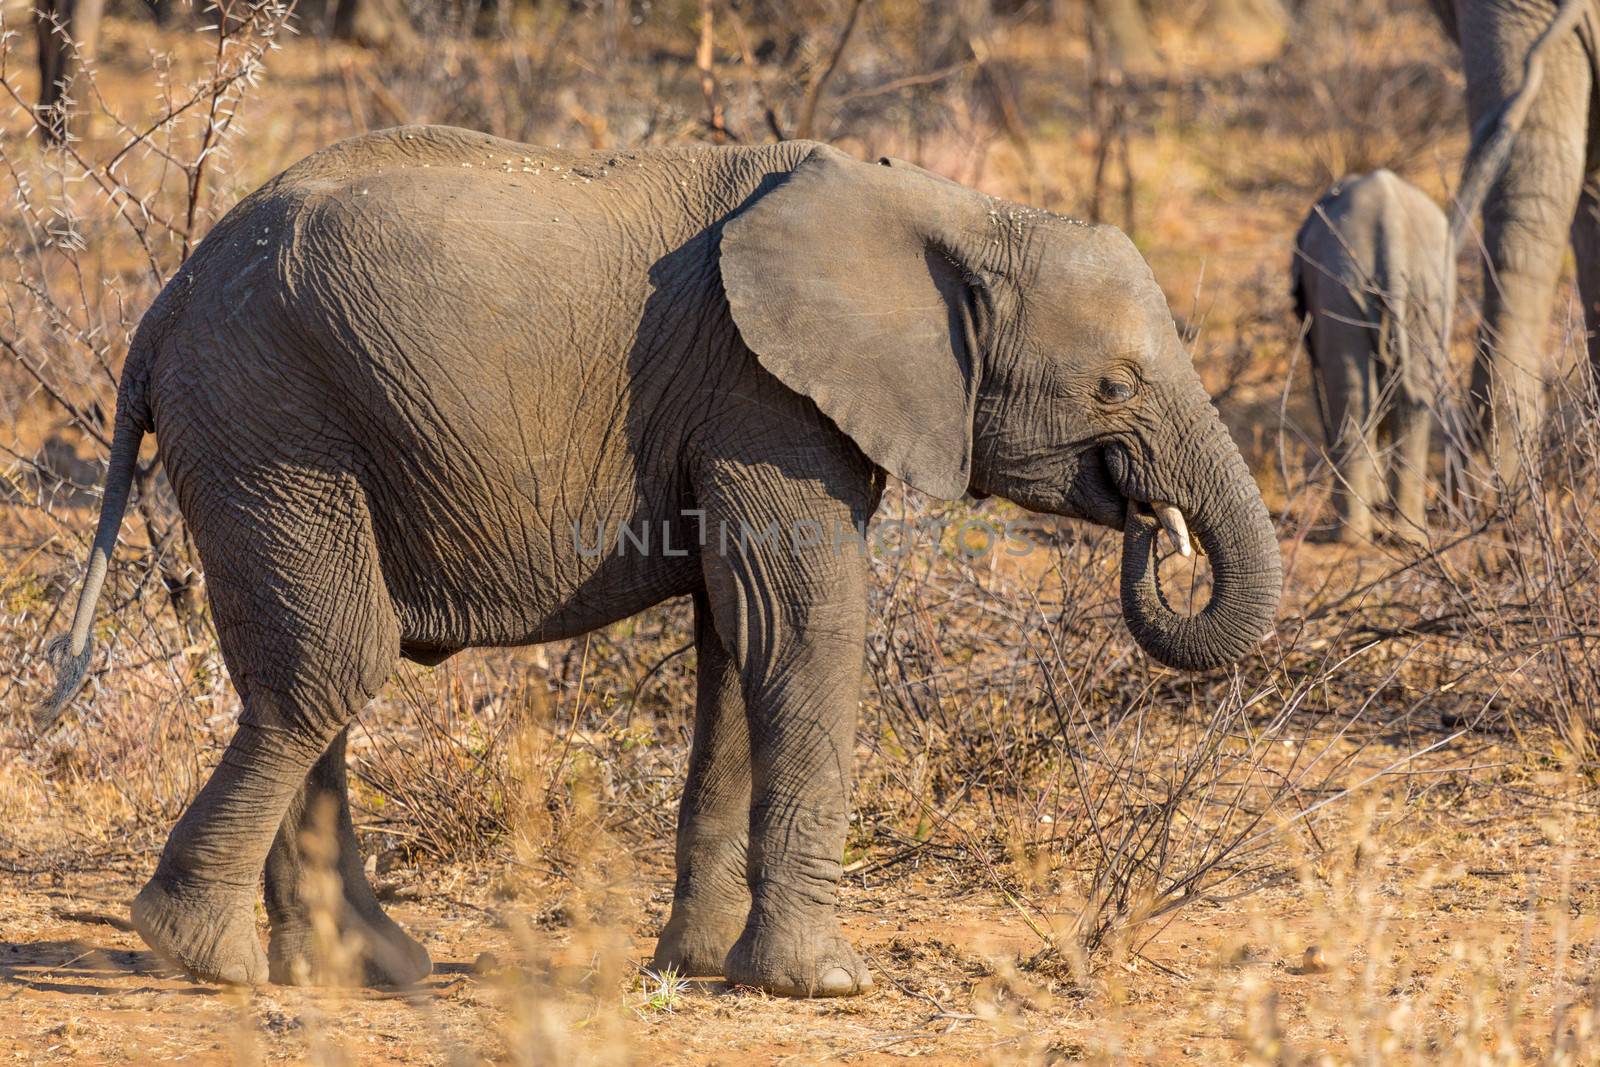 A very yount elephant wandering in the grasslands of South Africa's Pilanesberg National Park